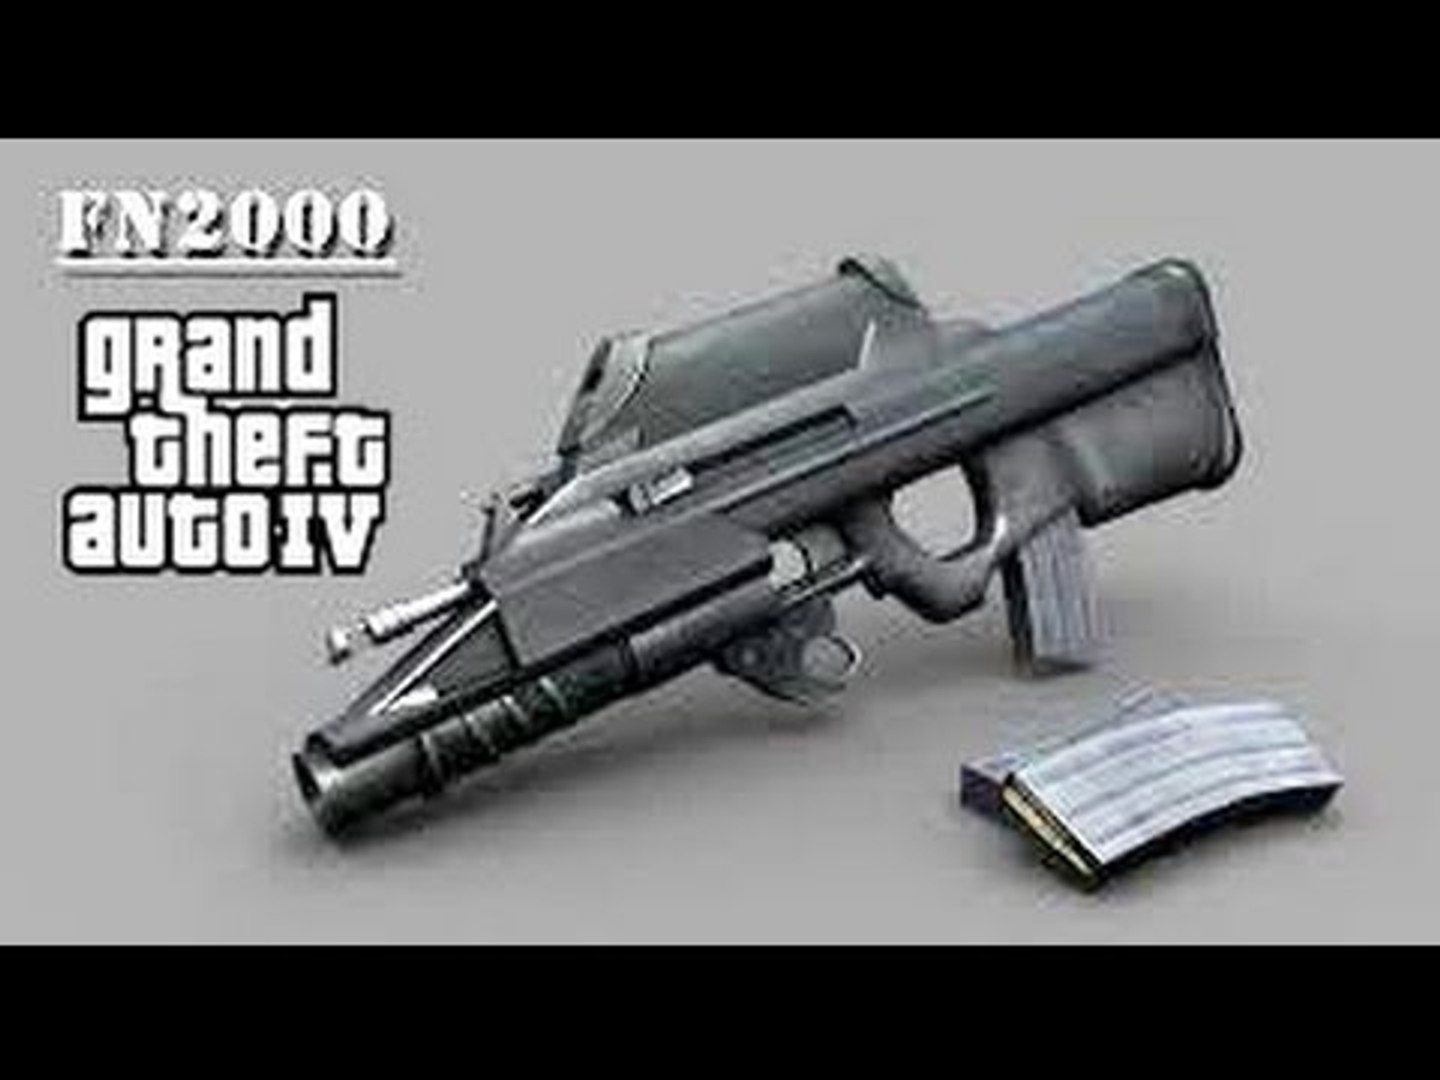 GRAND THEFT AUTO IV: FN2000 ASSAULT RIFLE - video Dailymotion